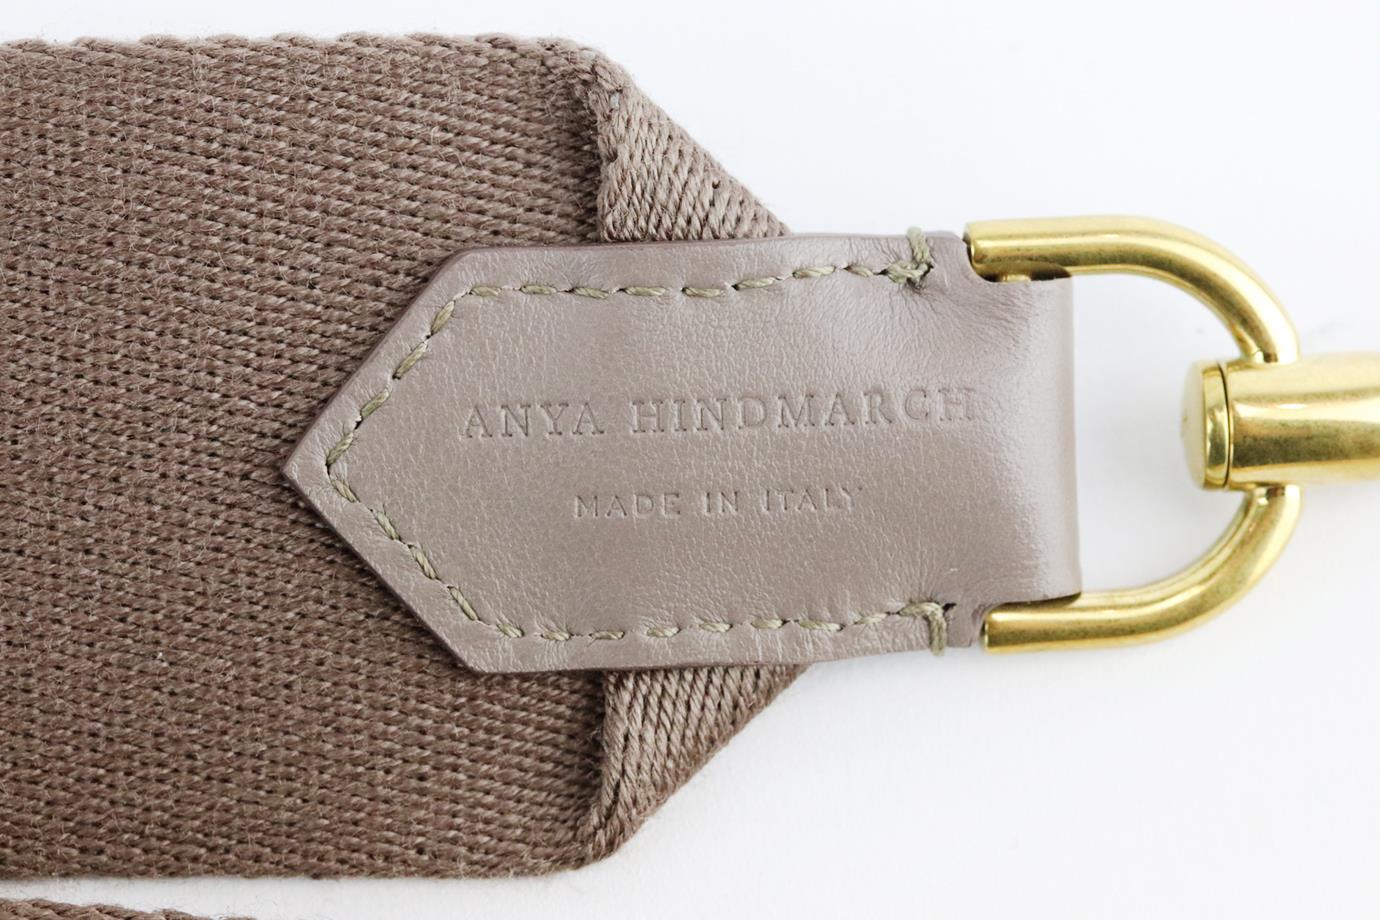 ANYA HINDMARCH EMBELLISHED CANVAS AND LEATHER BAG STRAP